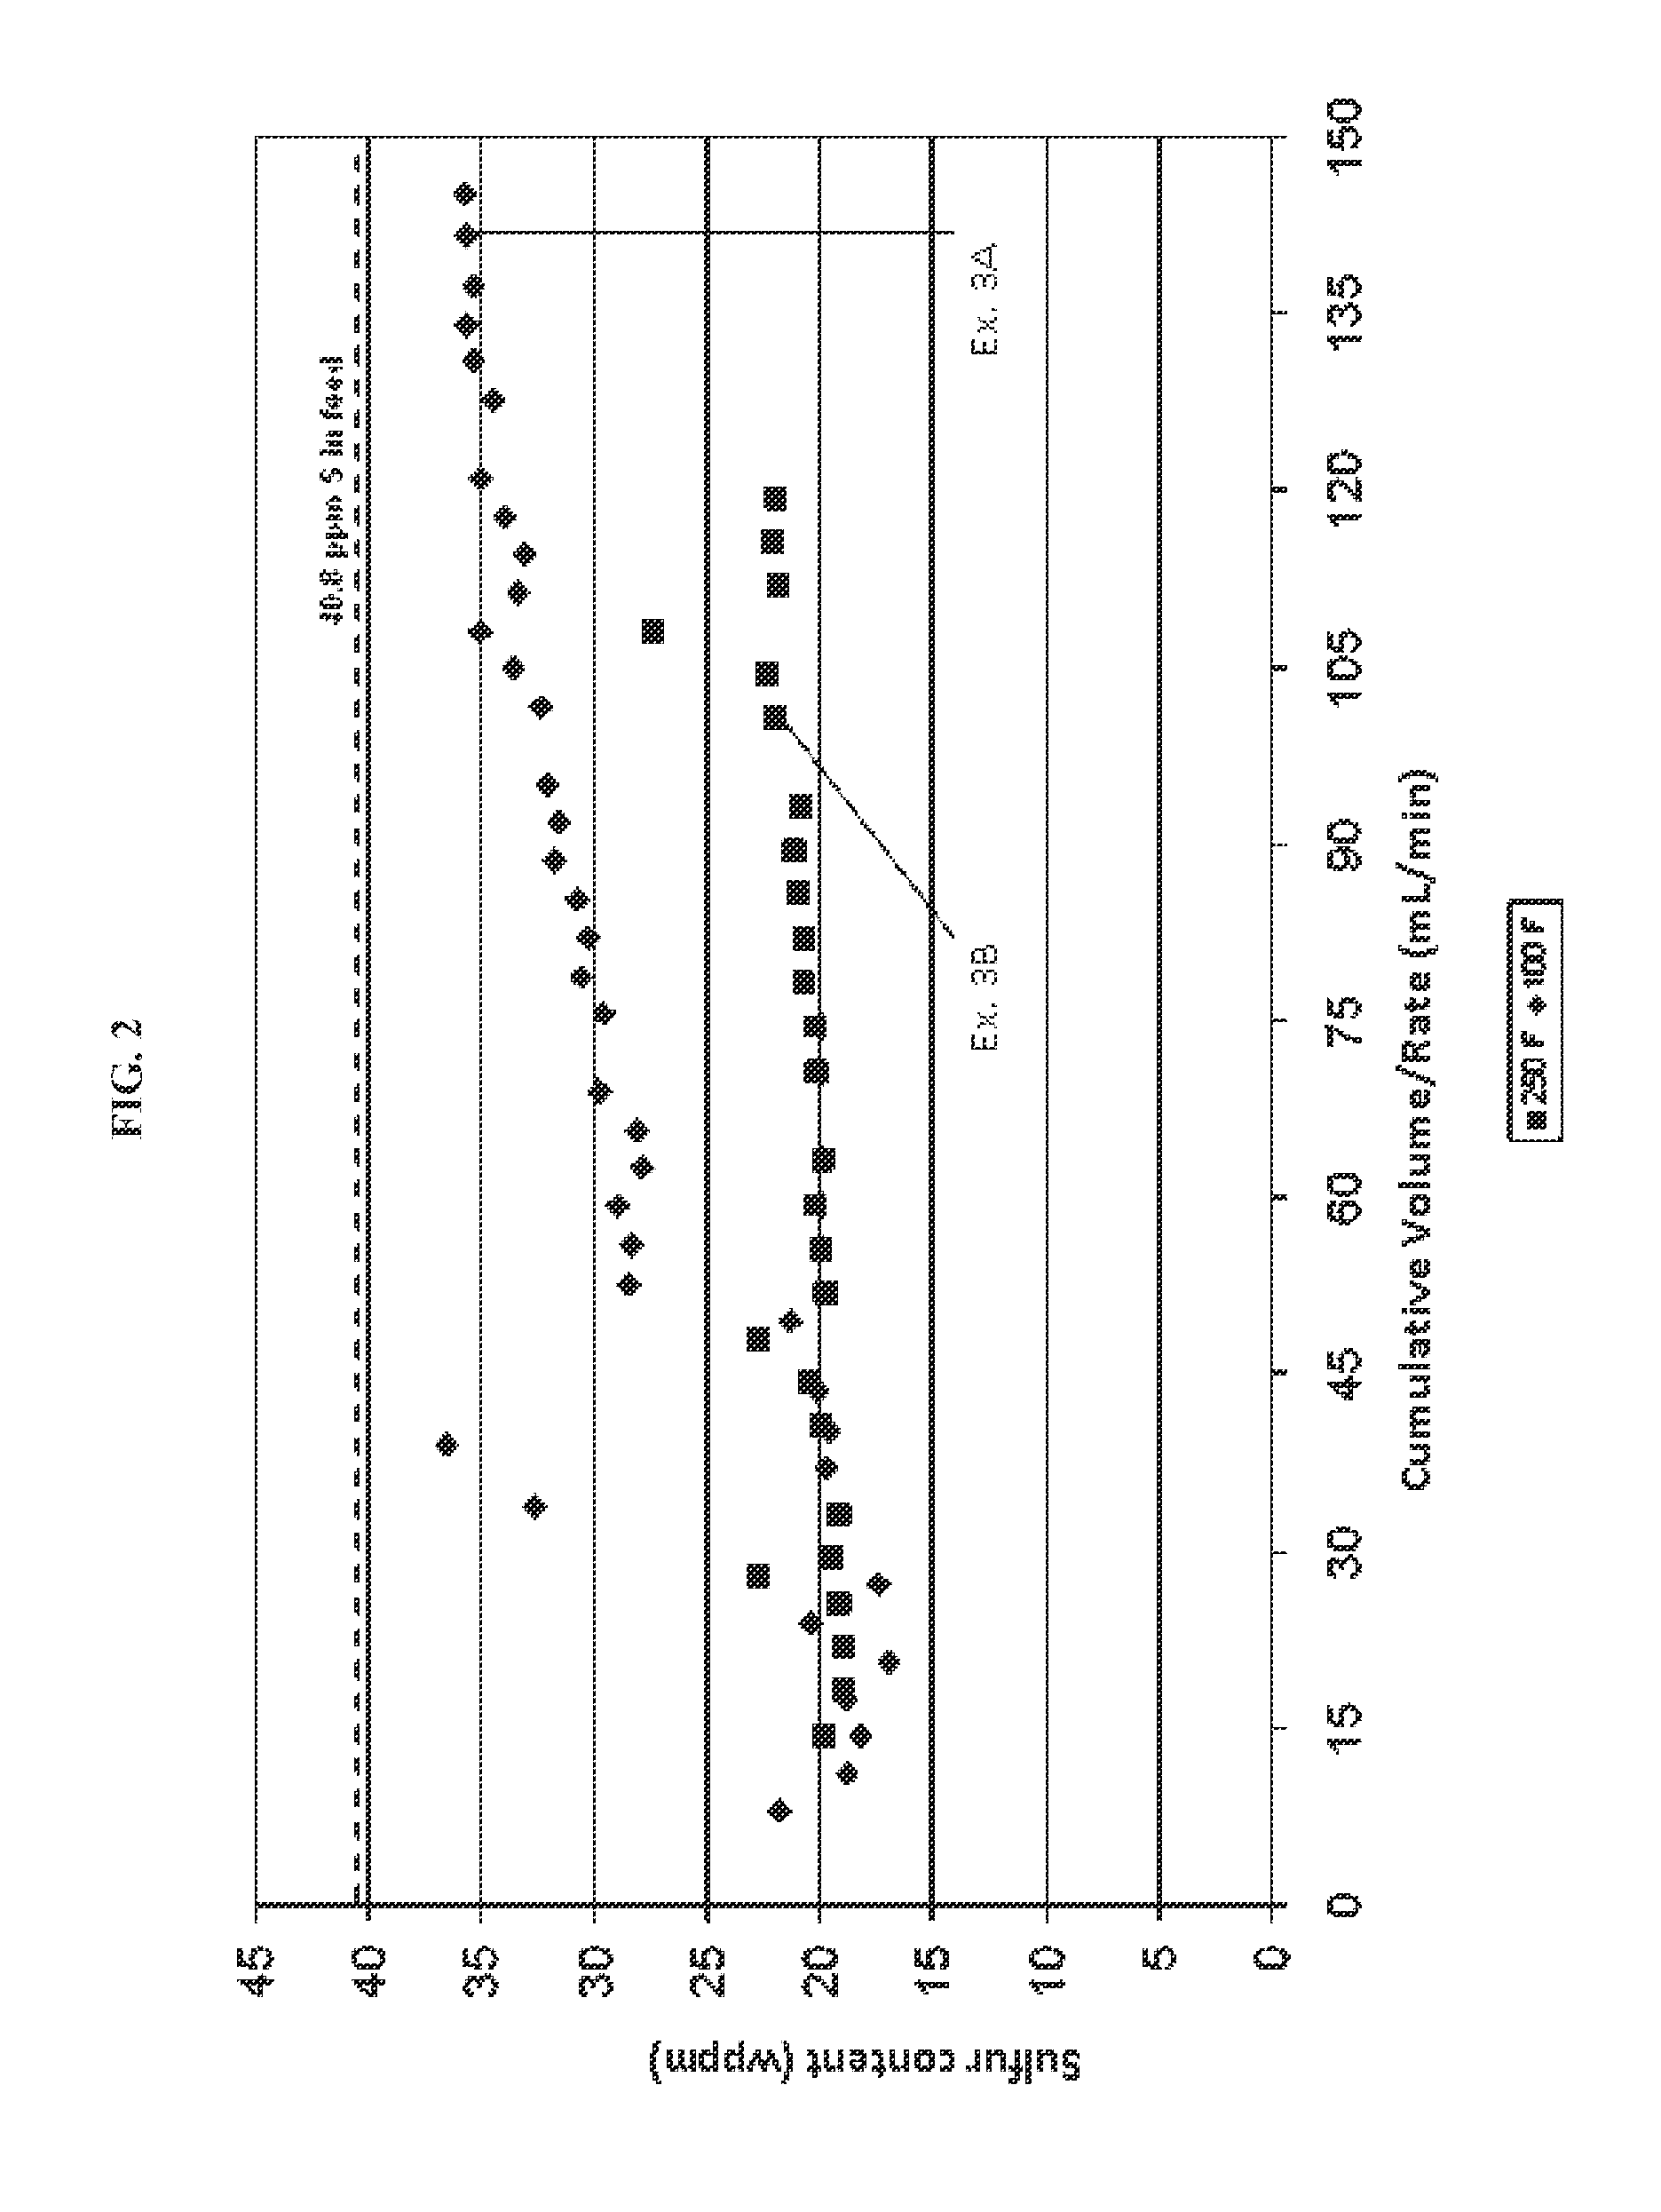 Low temperature adsorbent for removing sulfur from fuel